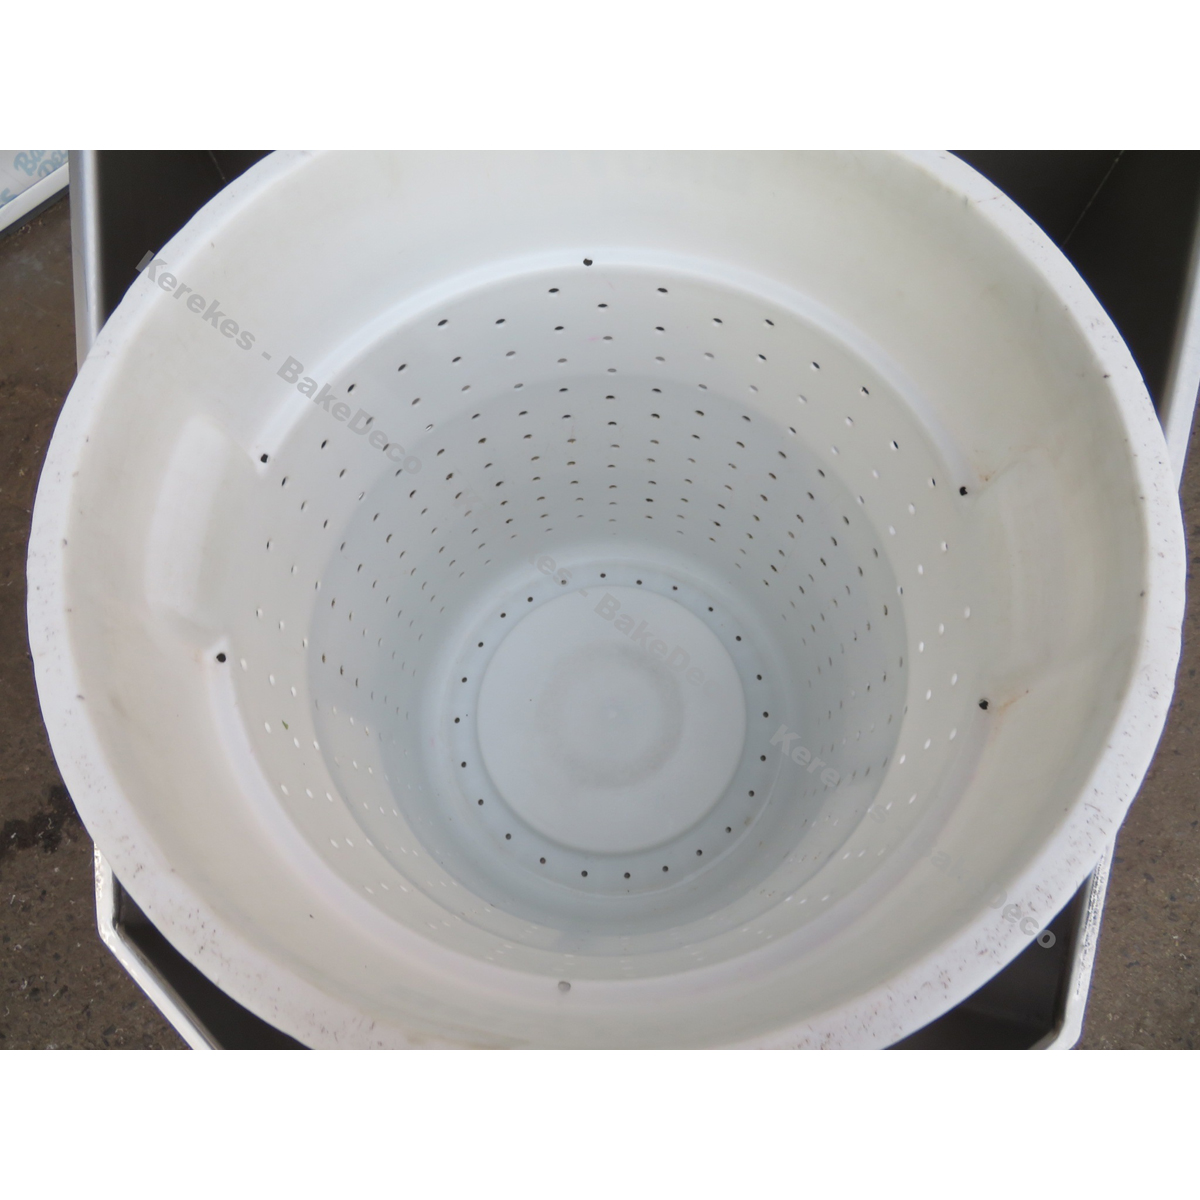 NSEP Salad Spinner FP-35, Used Excellent Condition image 3